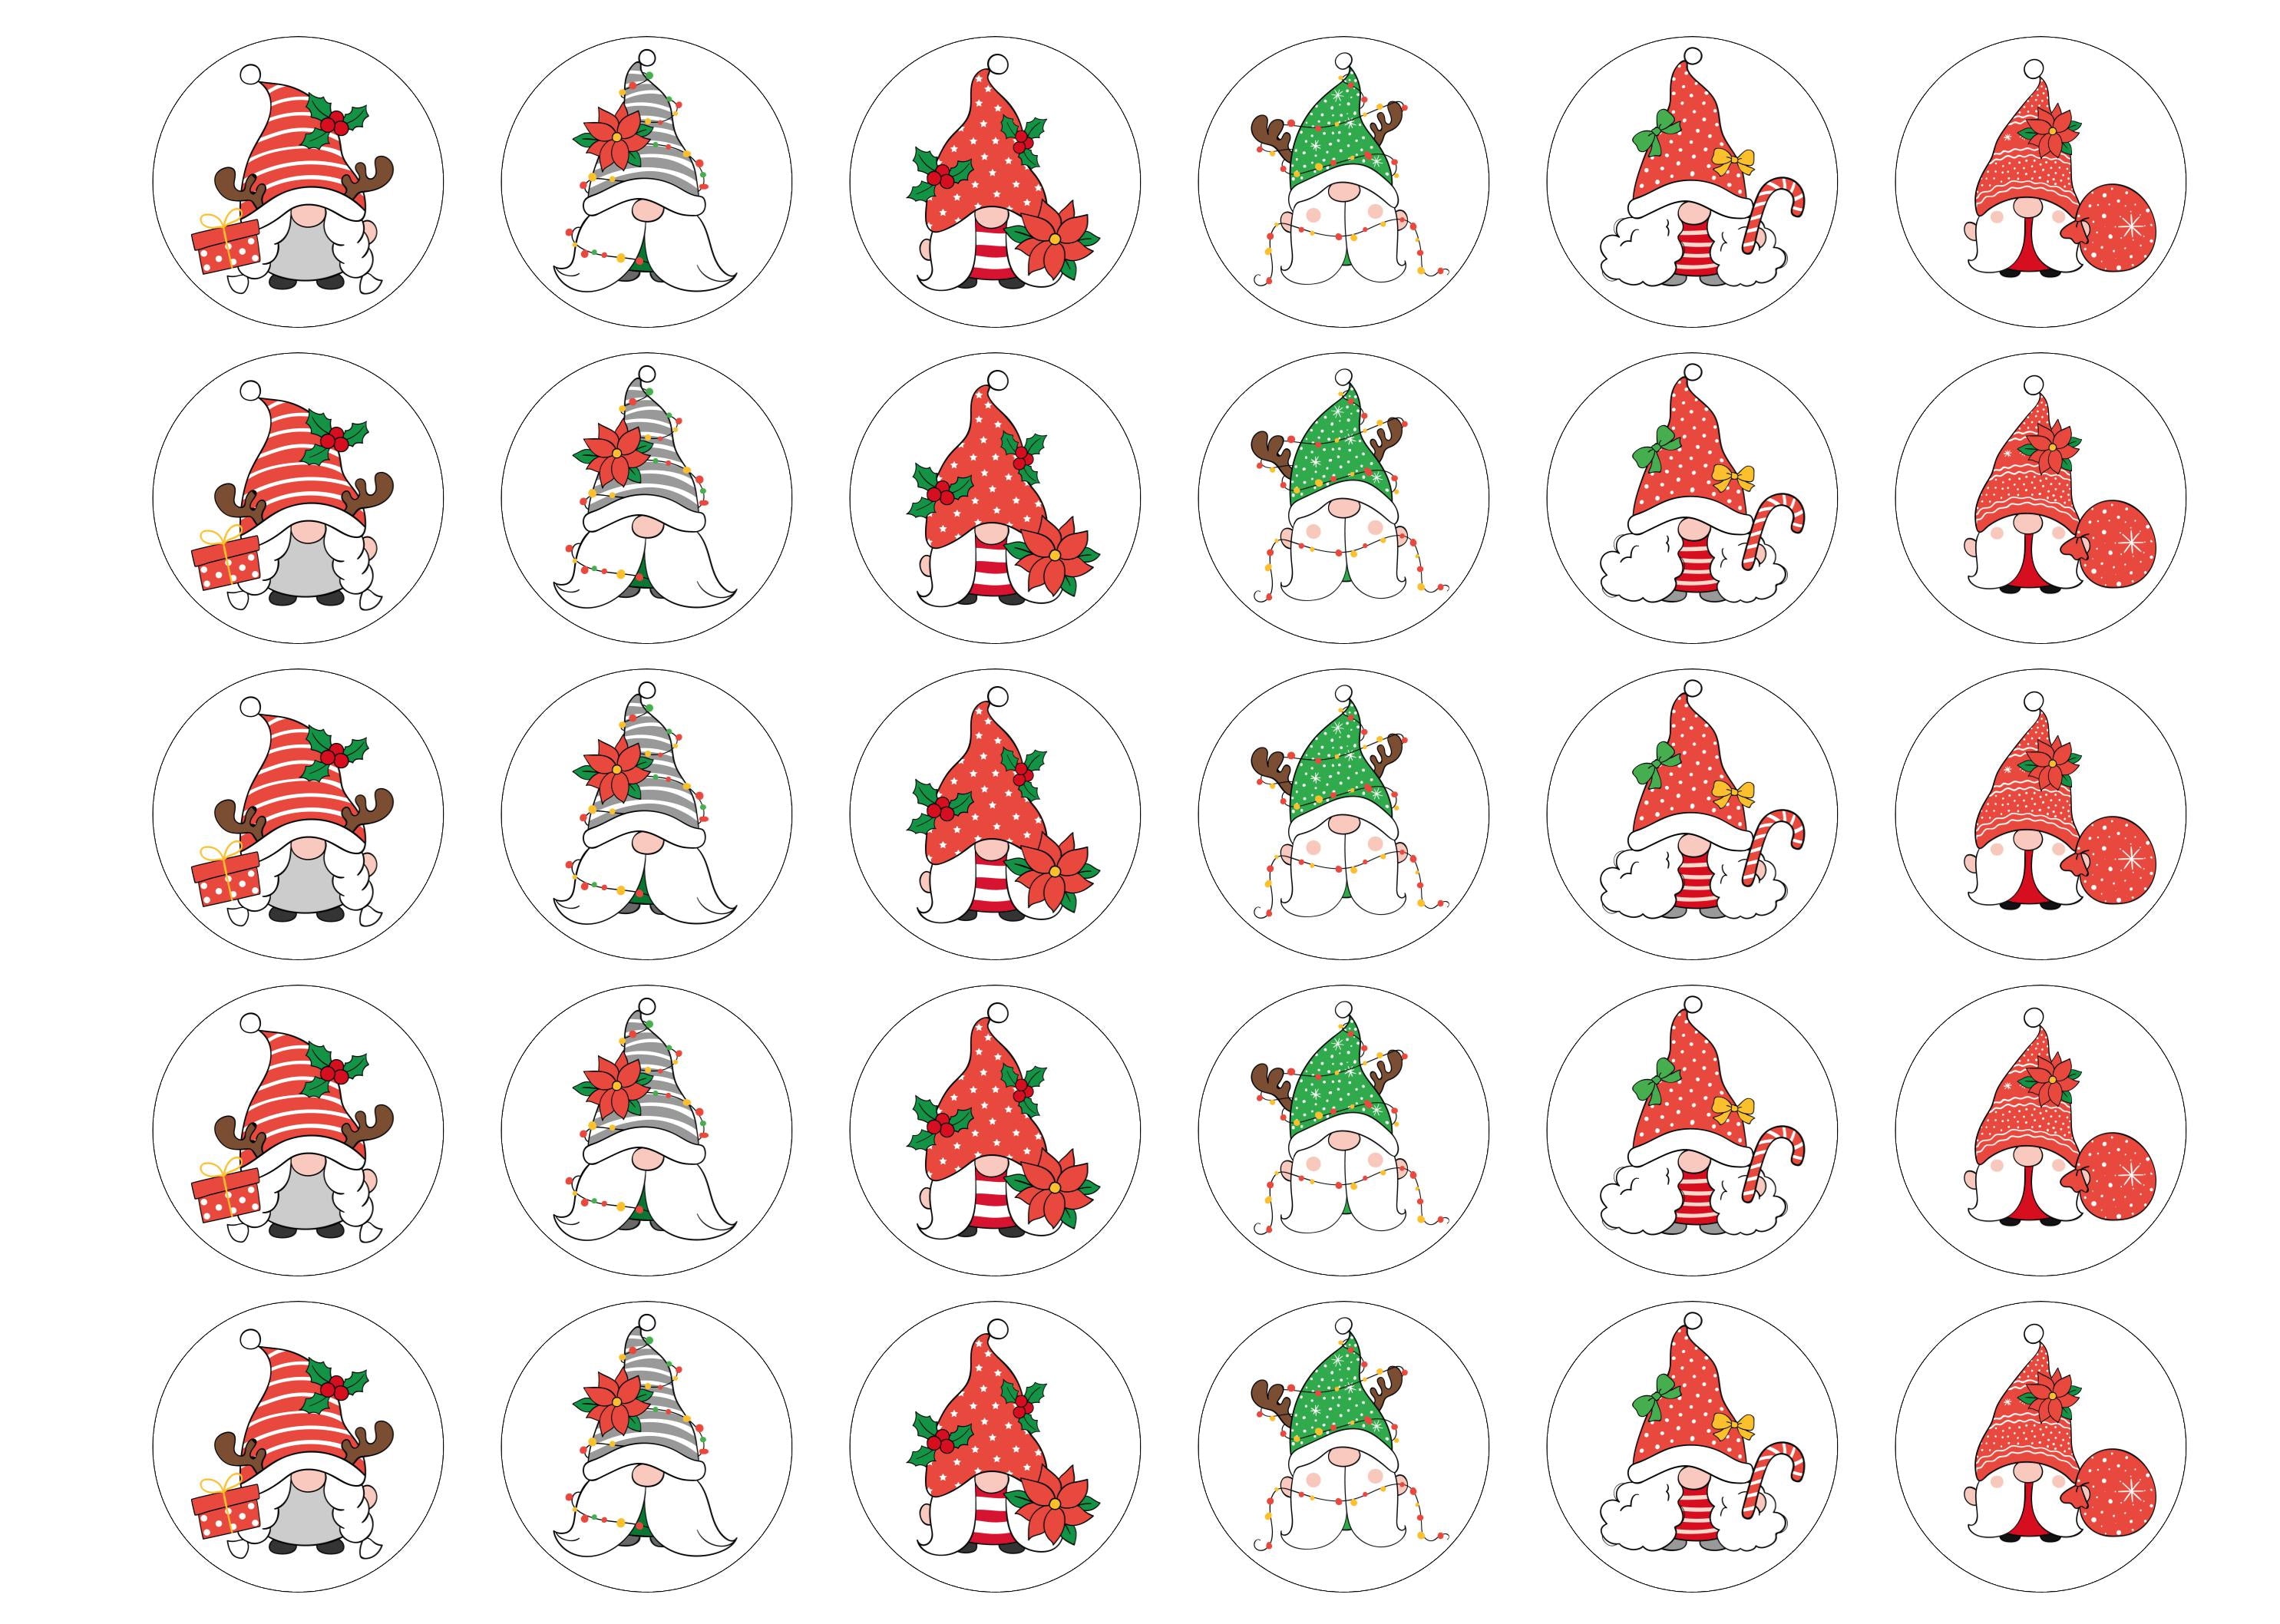 Edible cupcake toppers with Cute Christmas Gnomes